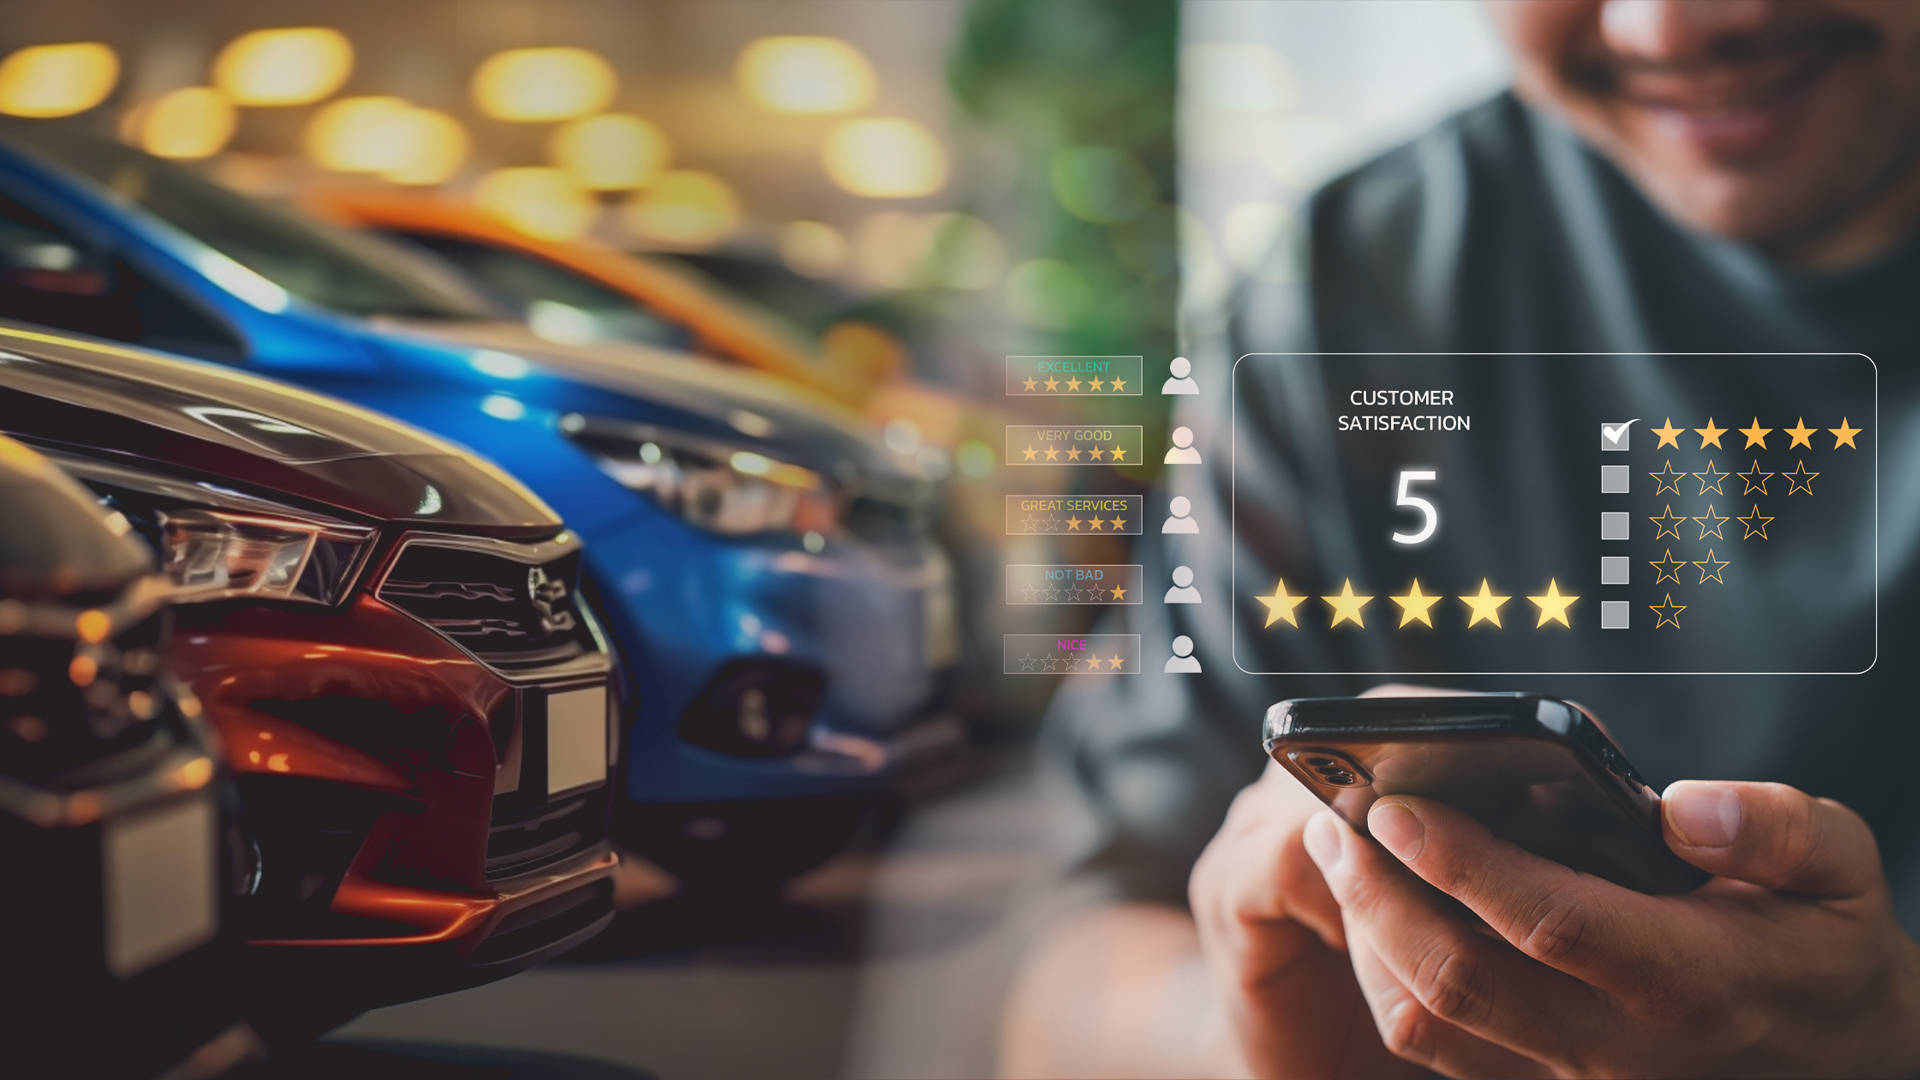 Customer Satisfaction Index (CSI) and Net Promoter Score (NPS) help drive your automotive business